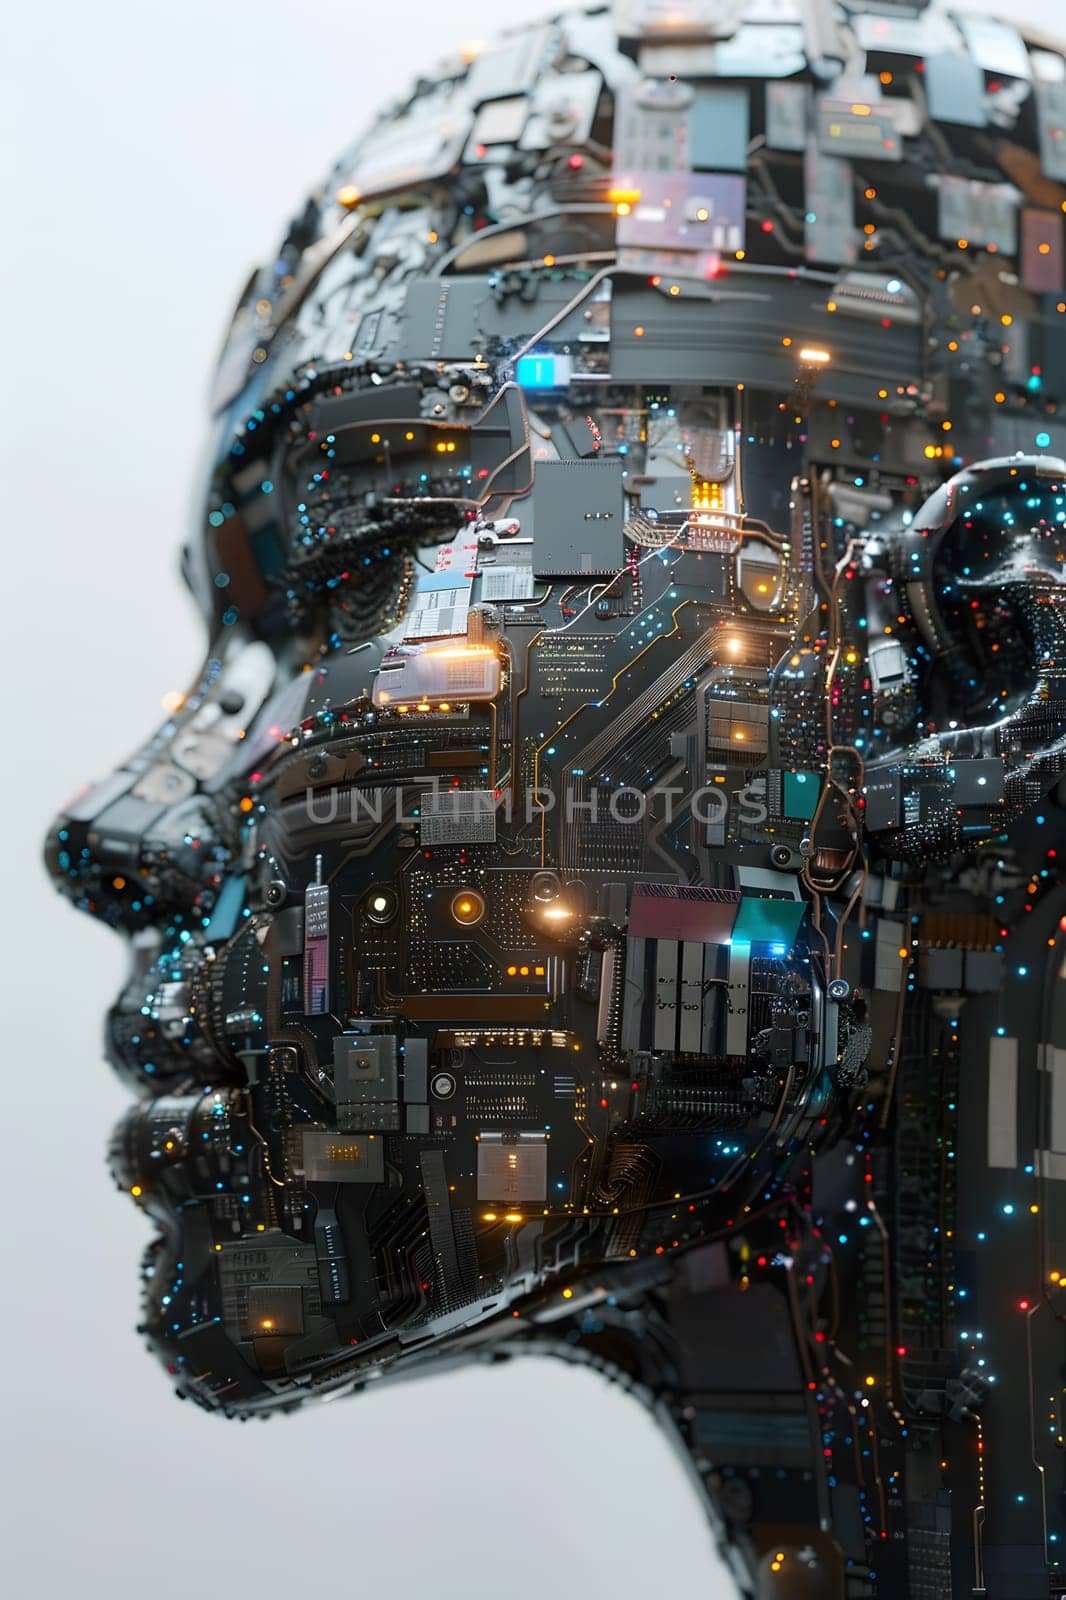 An artistic blend of urban design and engineering, a double exposure featuring a robots head against a city backdrop. A fusion of art, machine, and metal, creating a futuristic fashion accessory